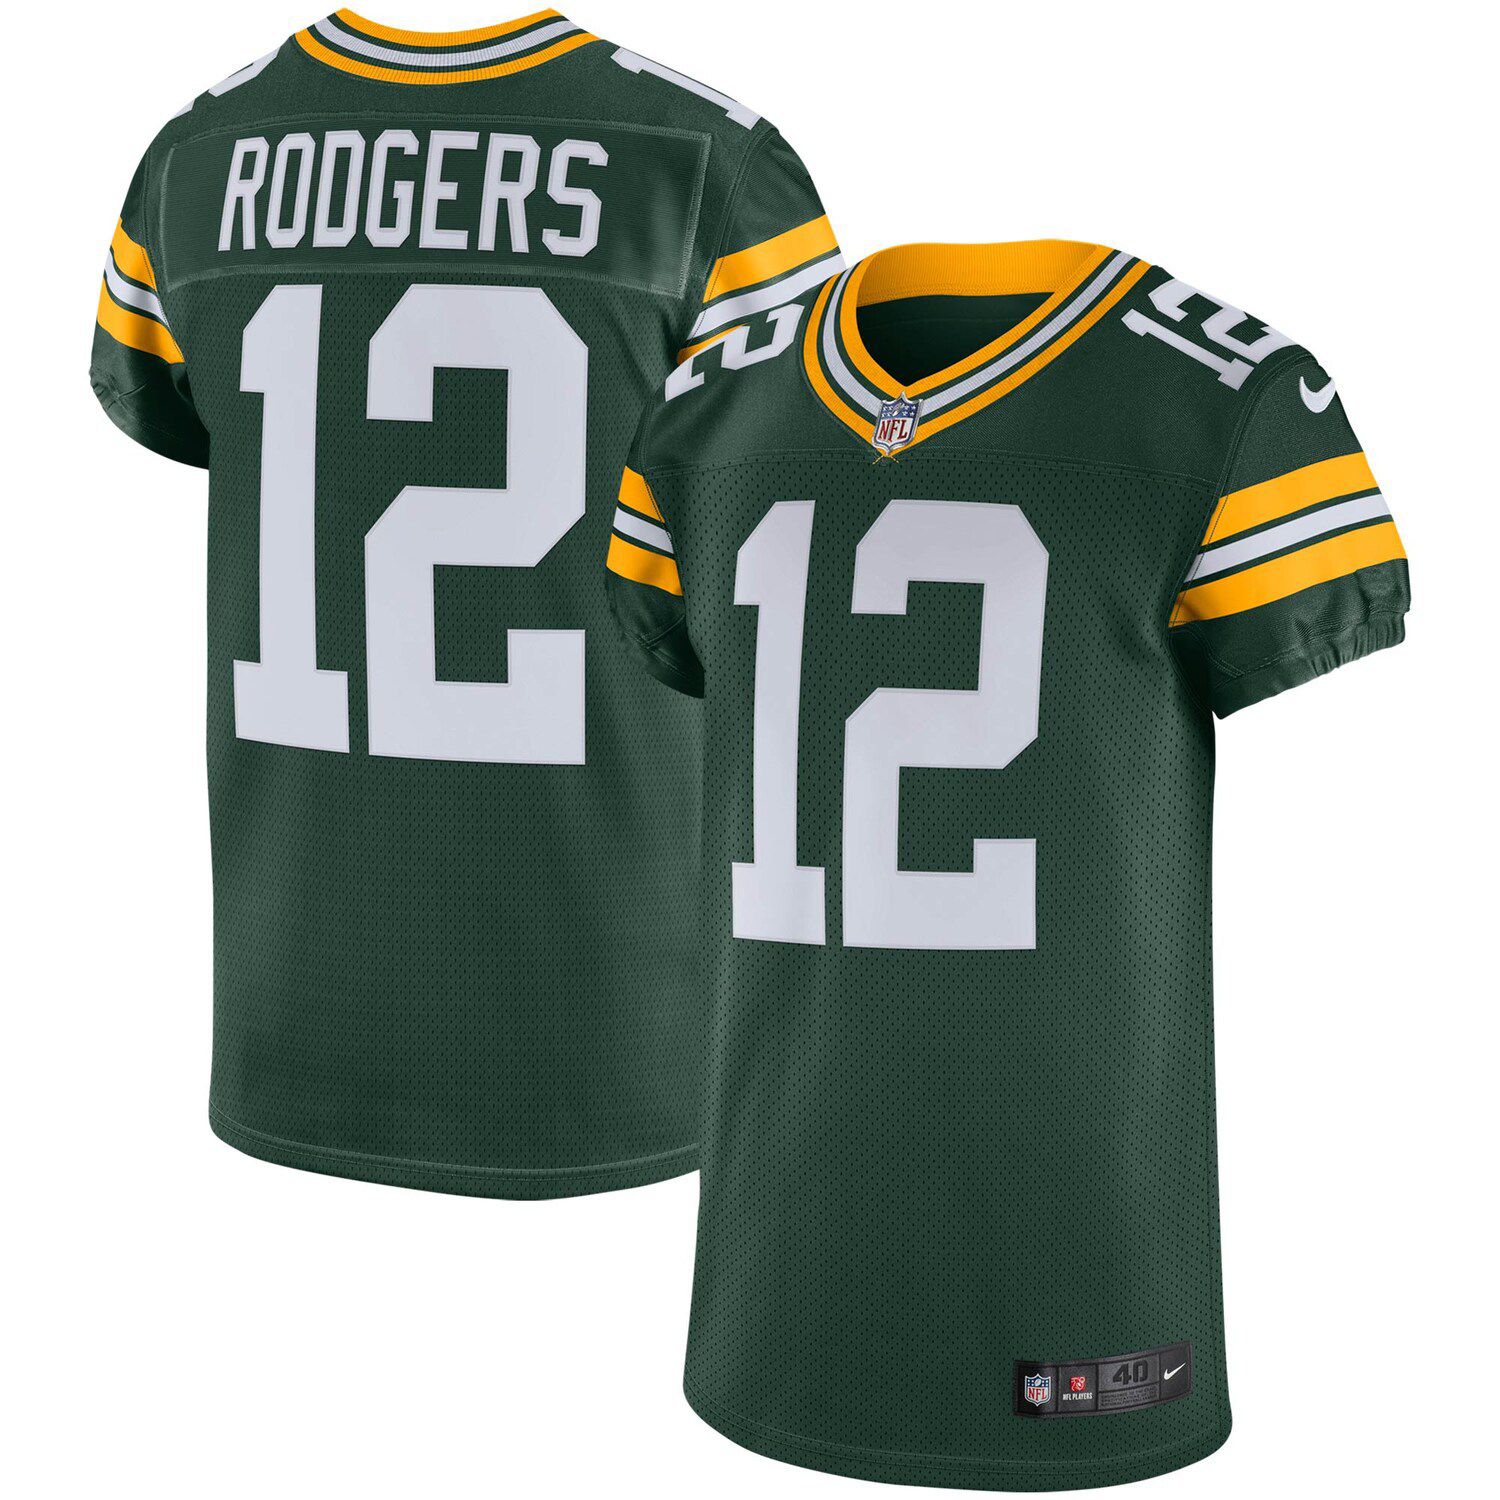 Green Bay Packers No12 Aaron Rodgers Men's Nike Multi-Color Black 2020 Crucial Catch Vapor Untouchable Limited Jersey